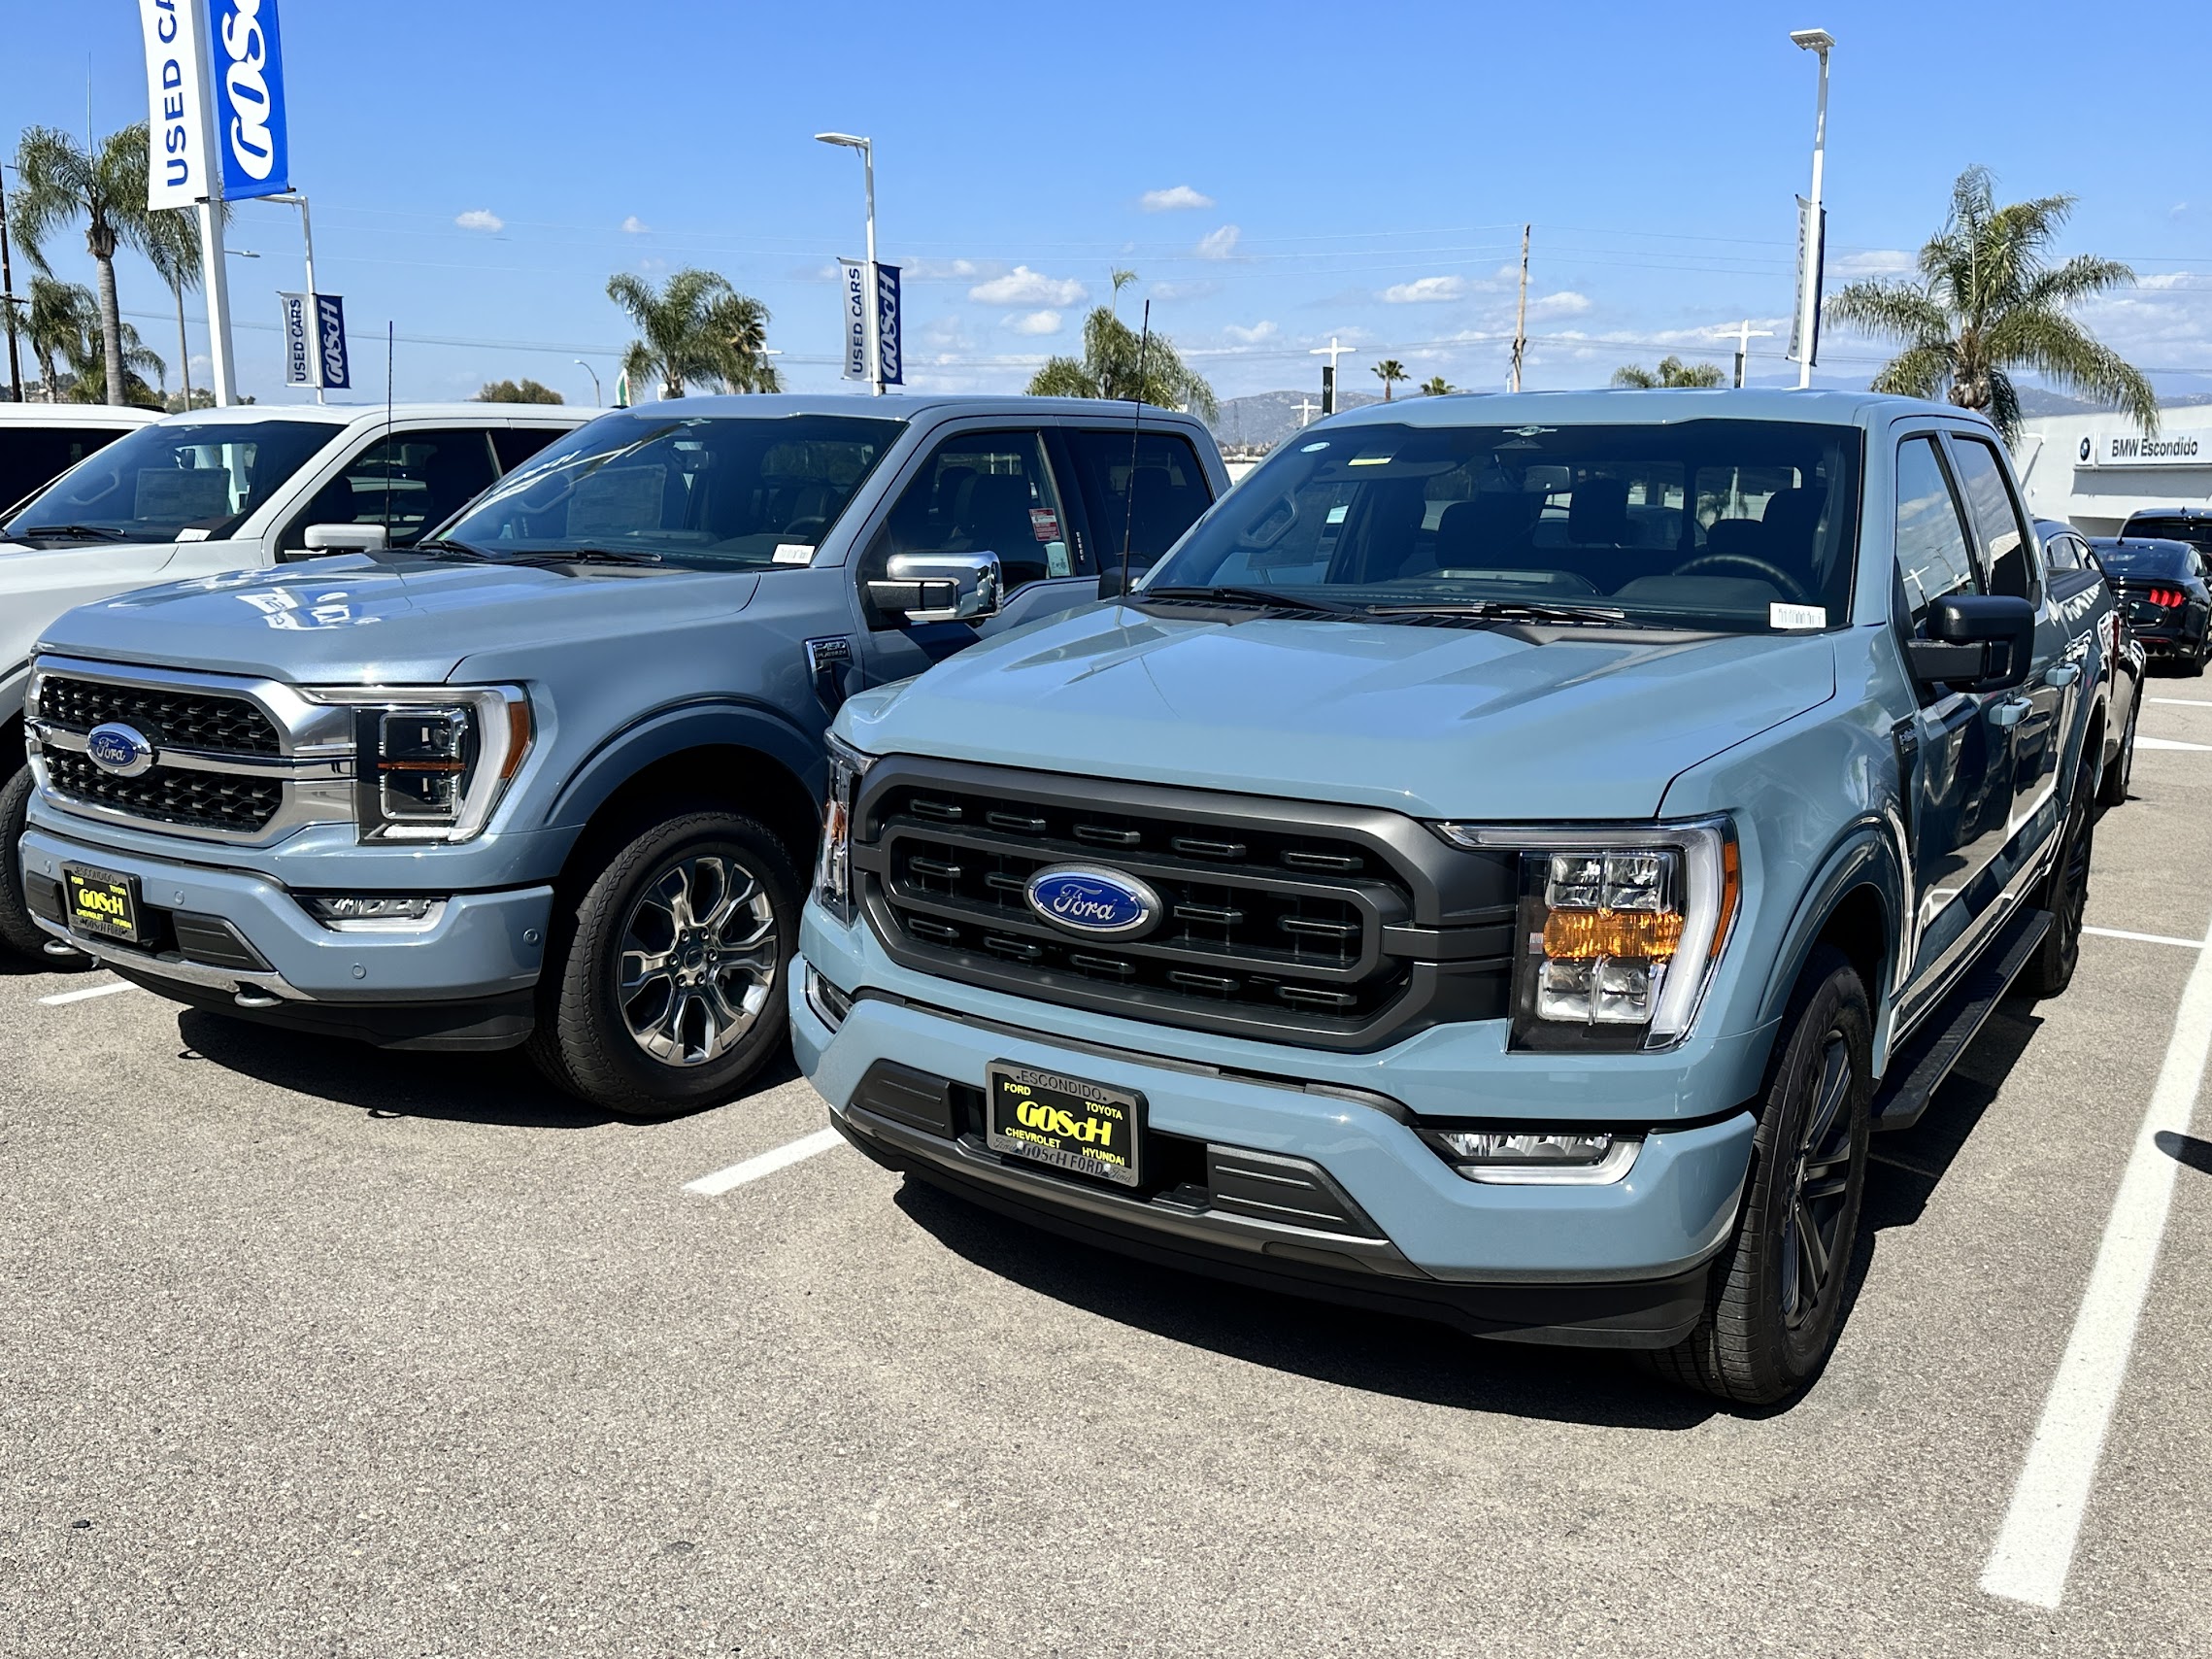 Is Making A COLOR CHOICE On A New Ford F150 Giving You The BLUES? Let